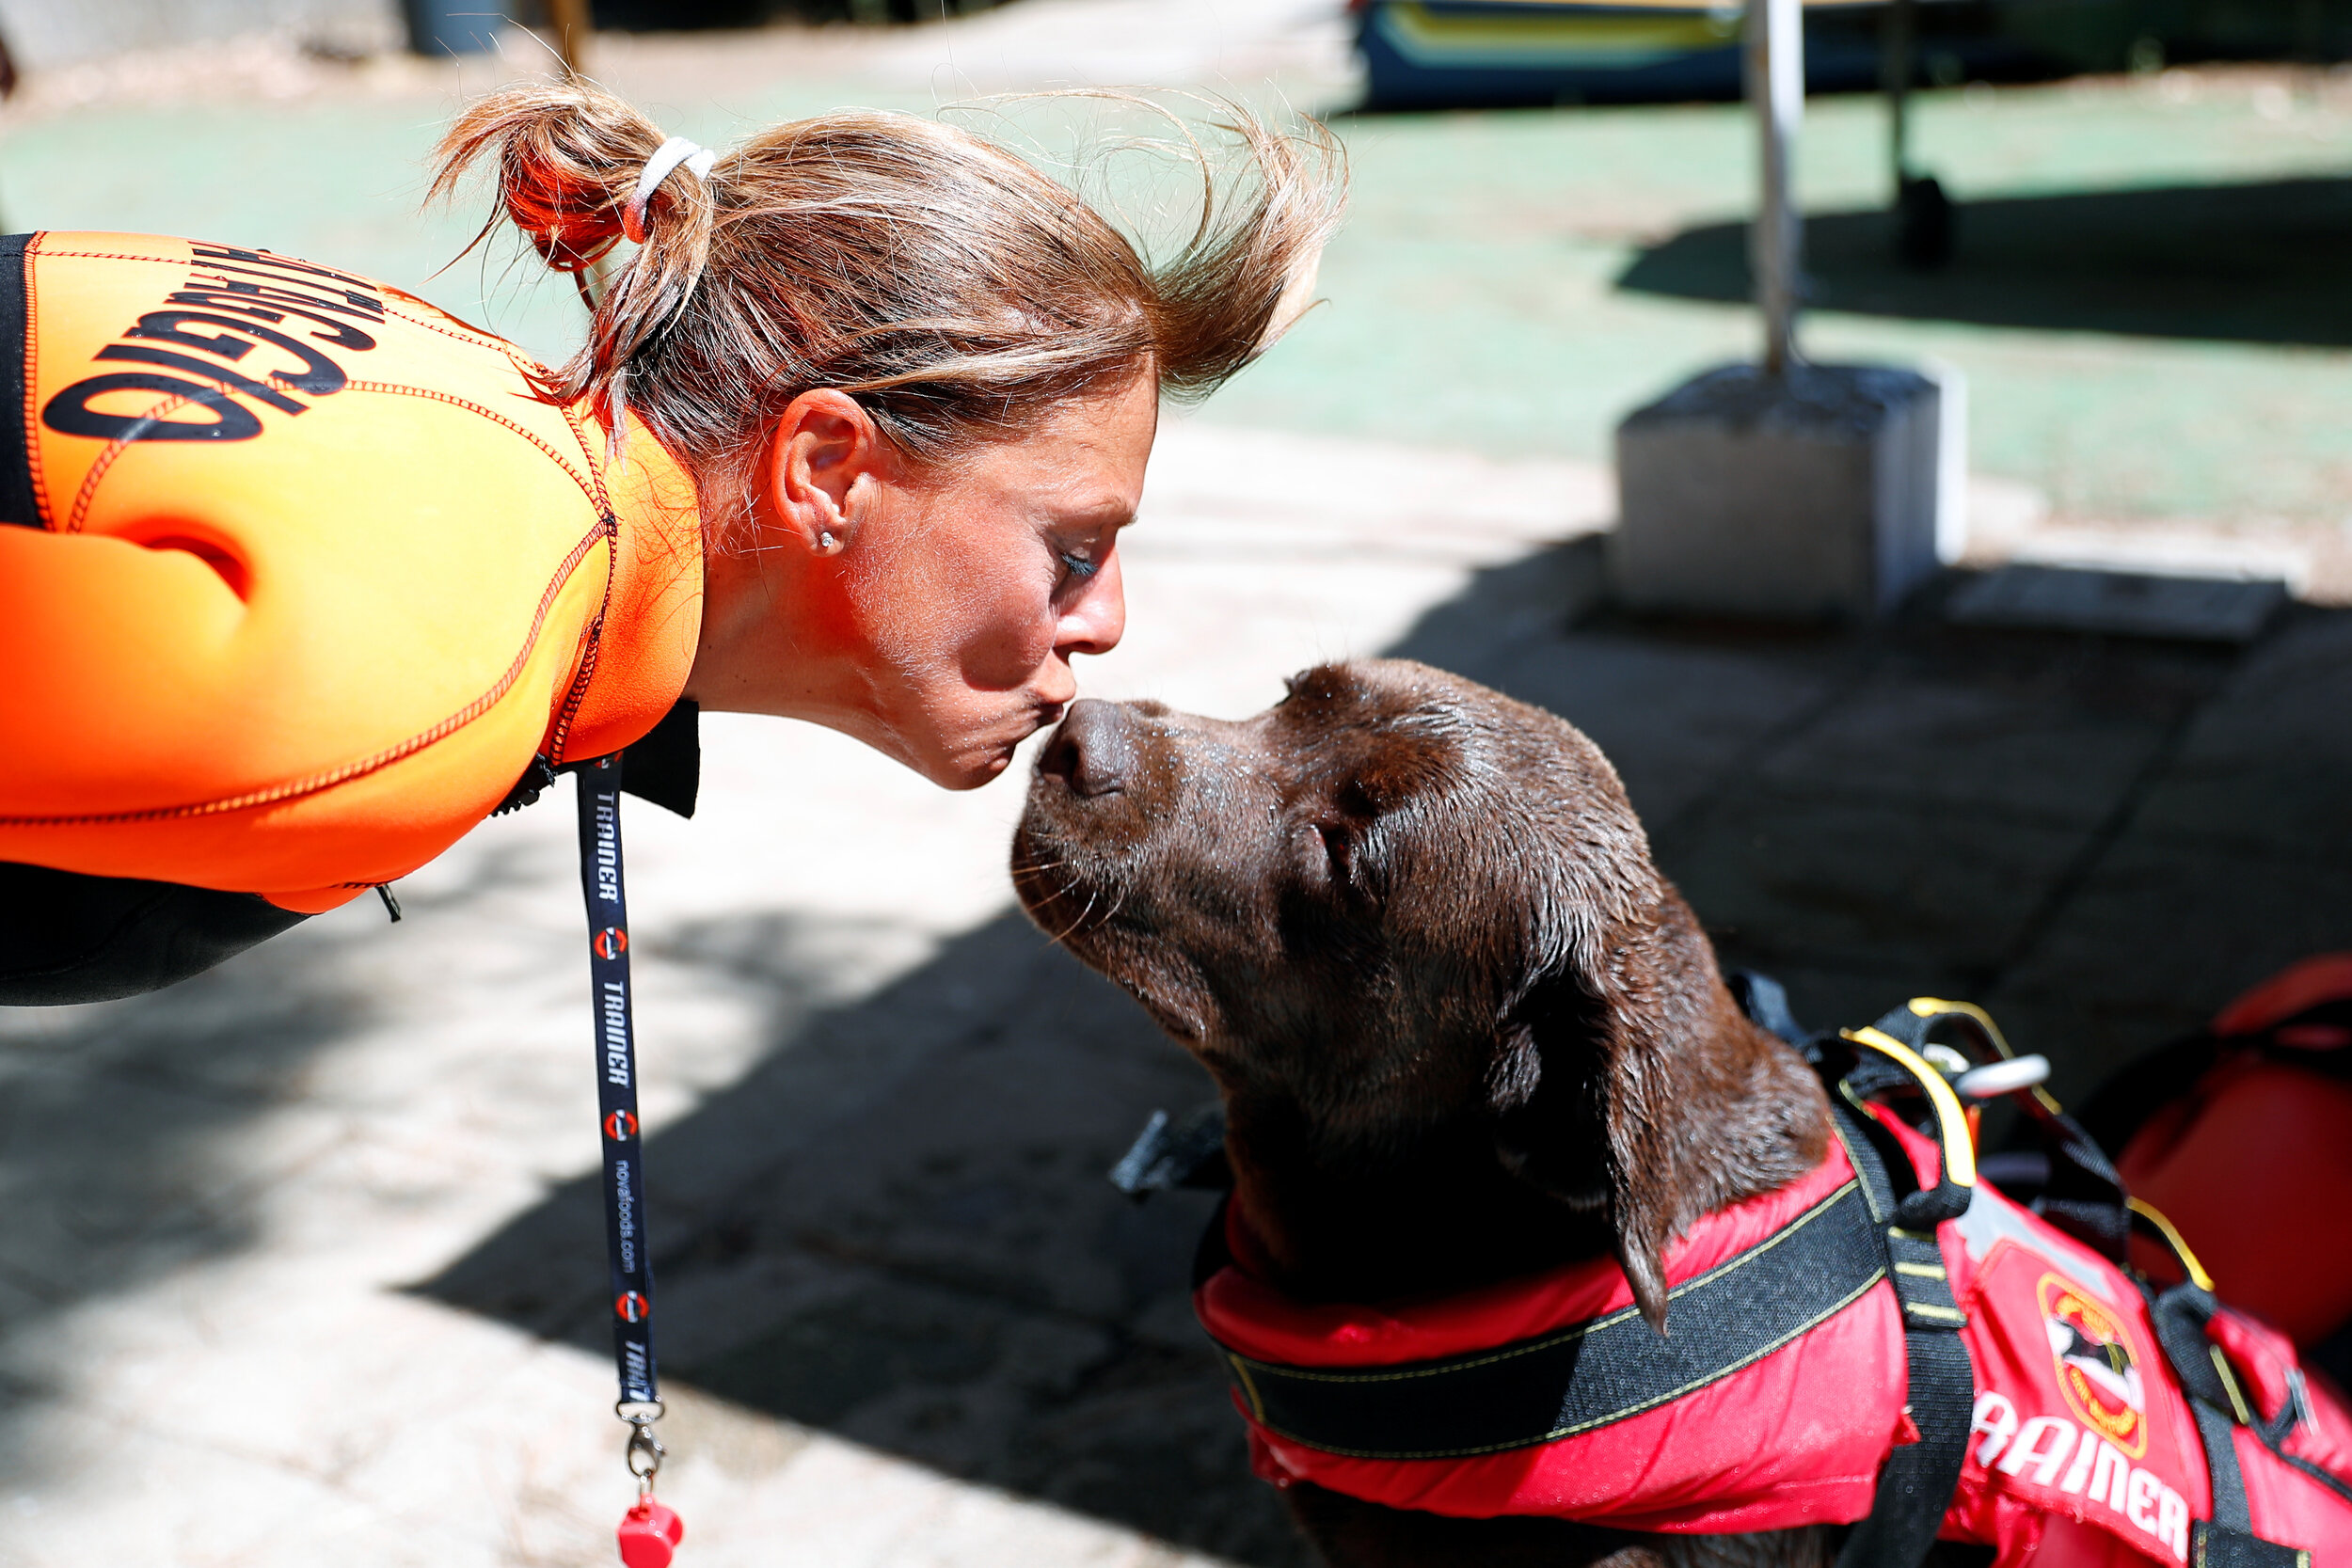  A member of an all-female group of canine rescuers from the Italian School of Rescue Dogs (La Scuola Italiana Cani Salvataggio) kisses her dog after they attended a training session before patrolling the beach to ensure swimmers can enjoy their time